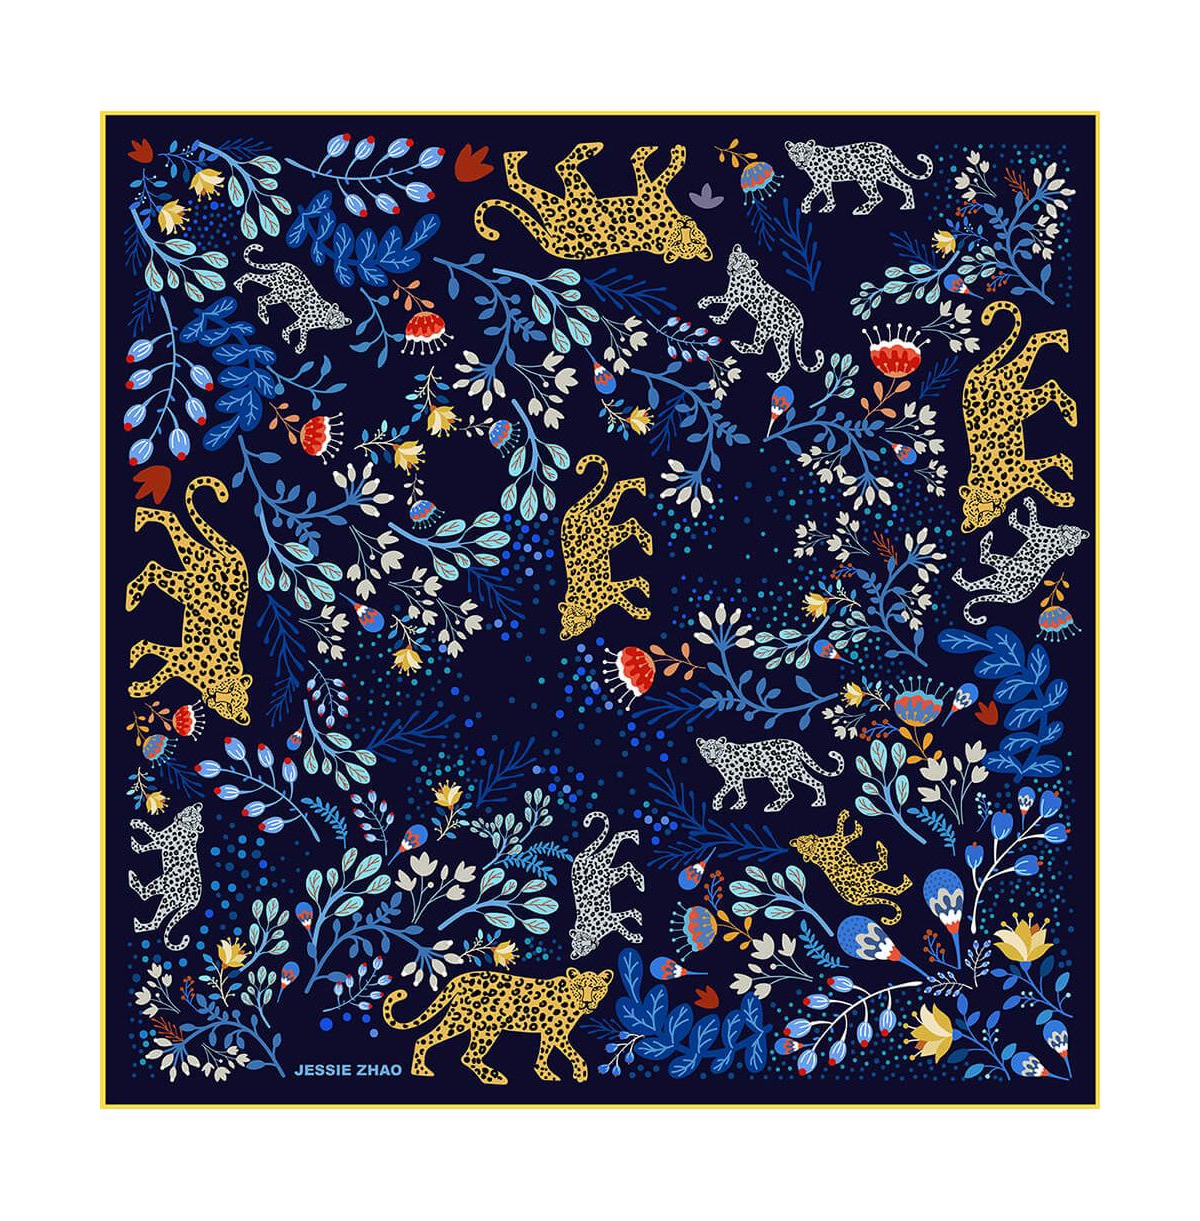 Double Sided Silk Scarf Of Amazon Rainforest Journey in Blue - Blue and yellow